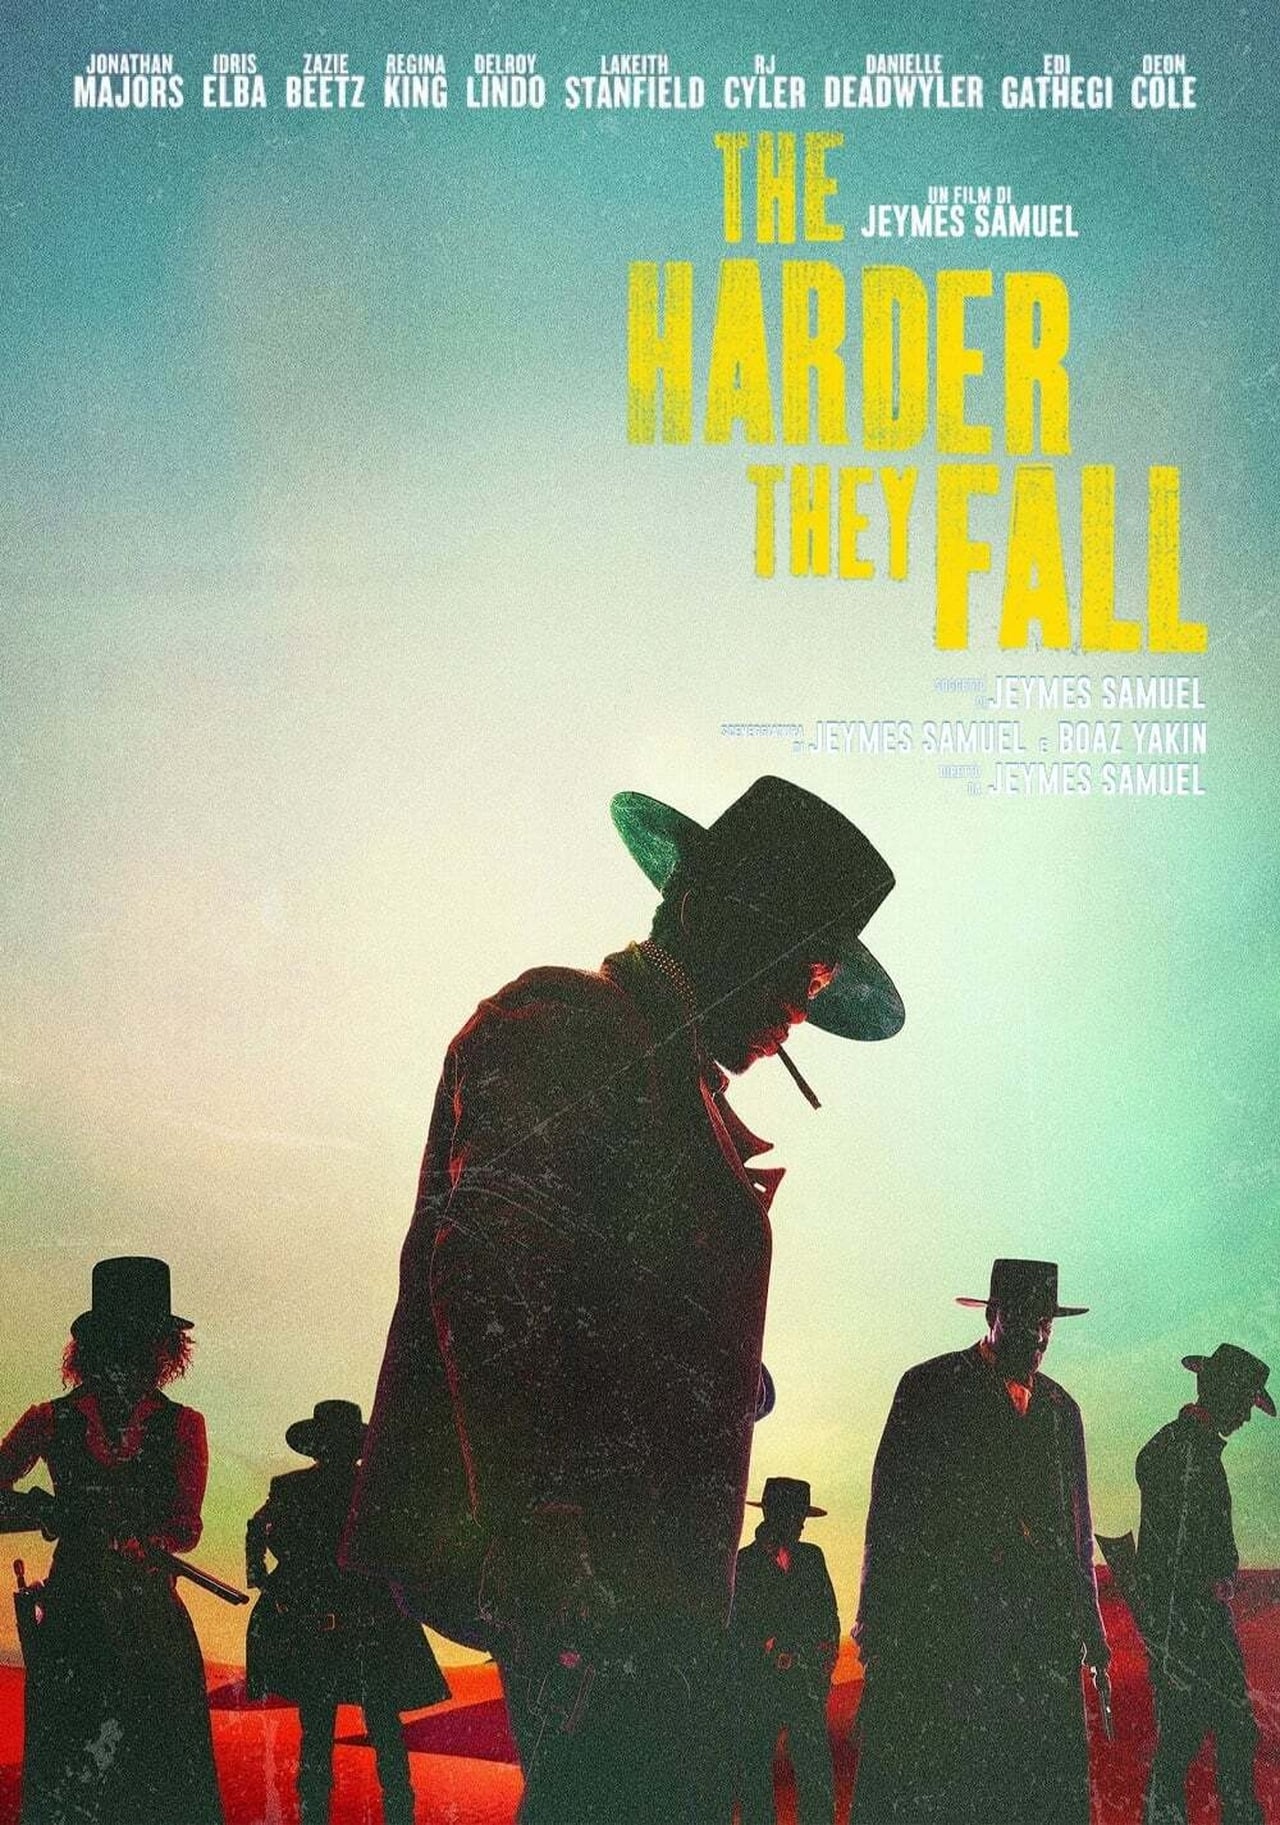 The Harder They Fall (2021) 640Kbps 24Fps 48Khz 5.1Ch DD+ NF E-AC3 Turkish Audio TAC